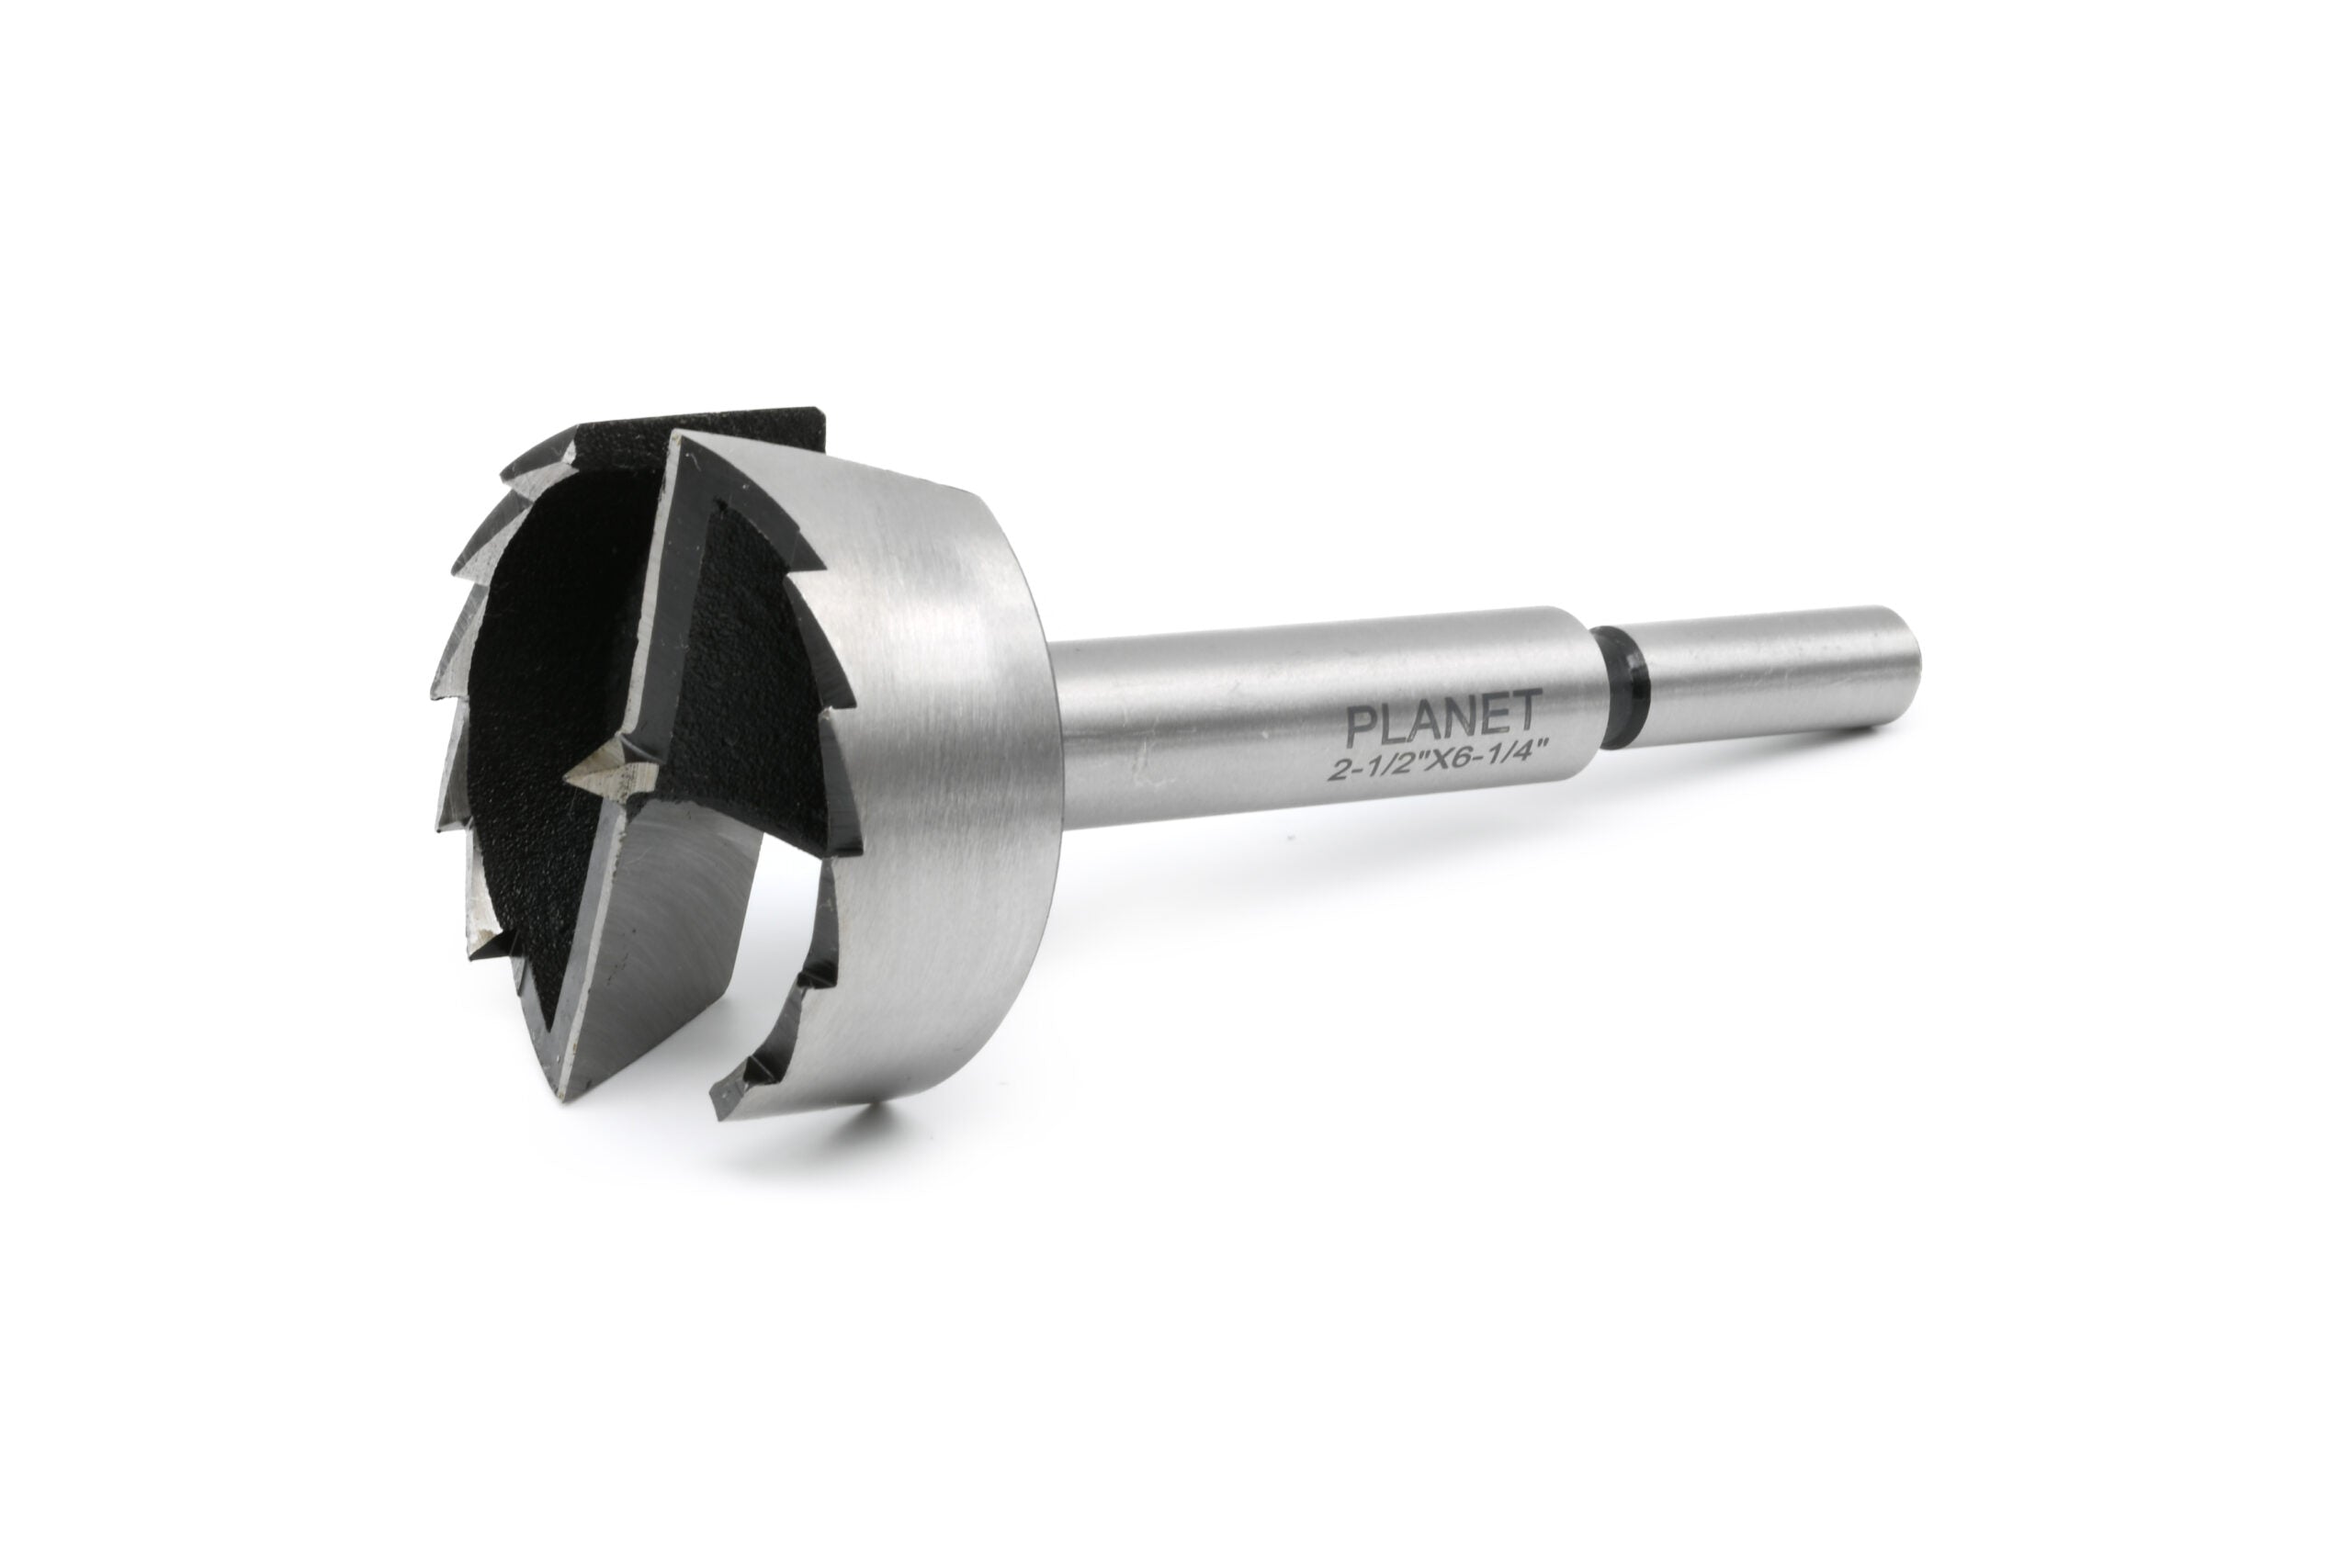 Planet Long Series Saw Tooth Forstner Bit 1-3/8" 34.93mm